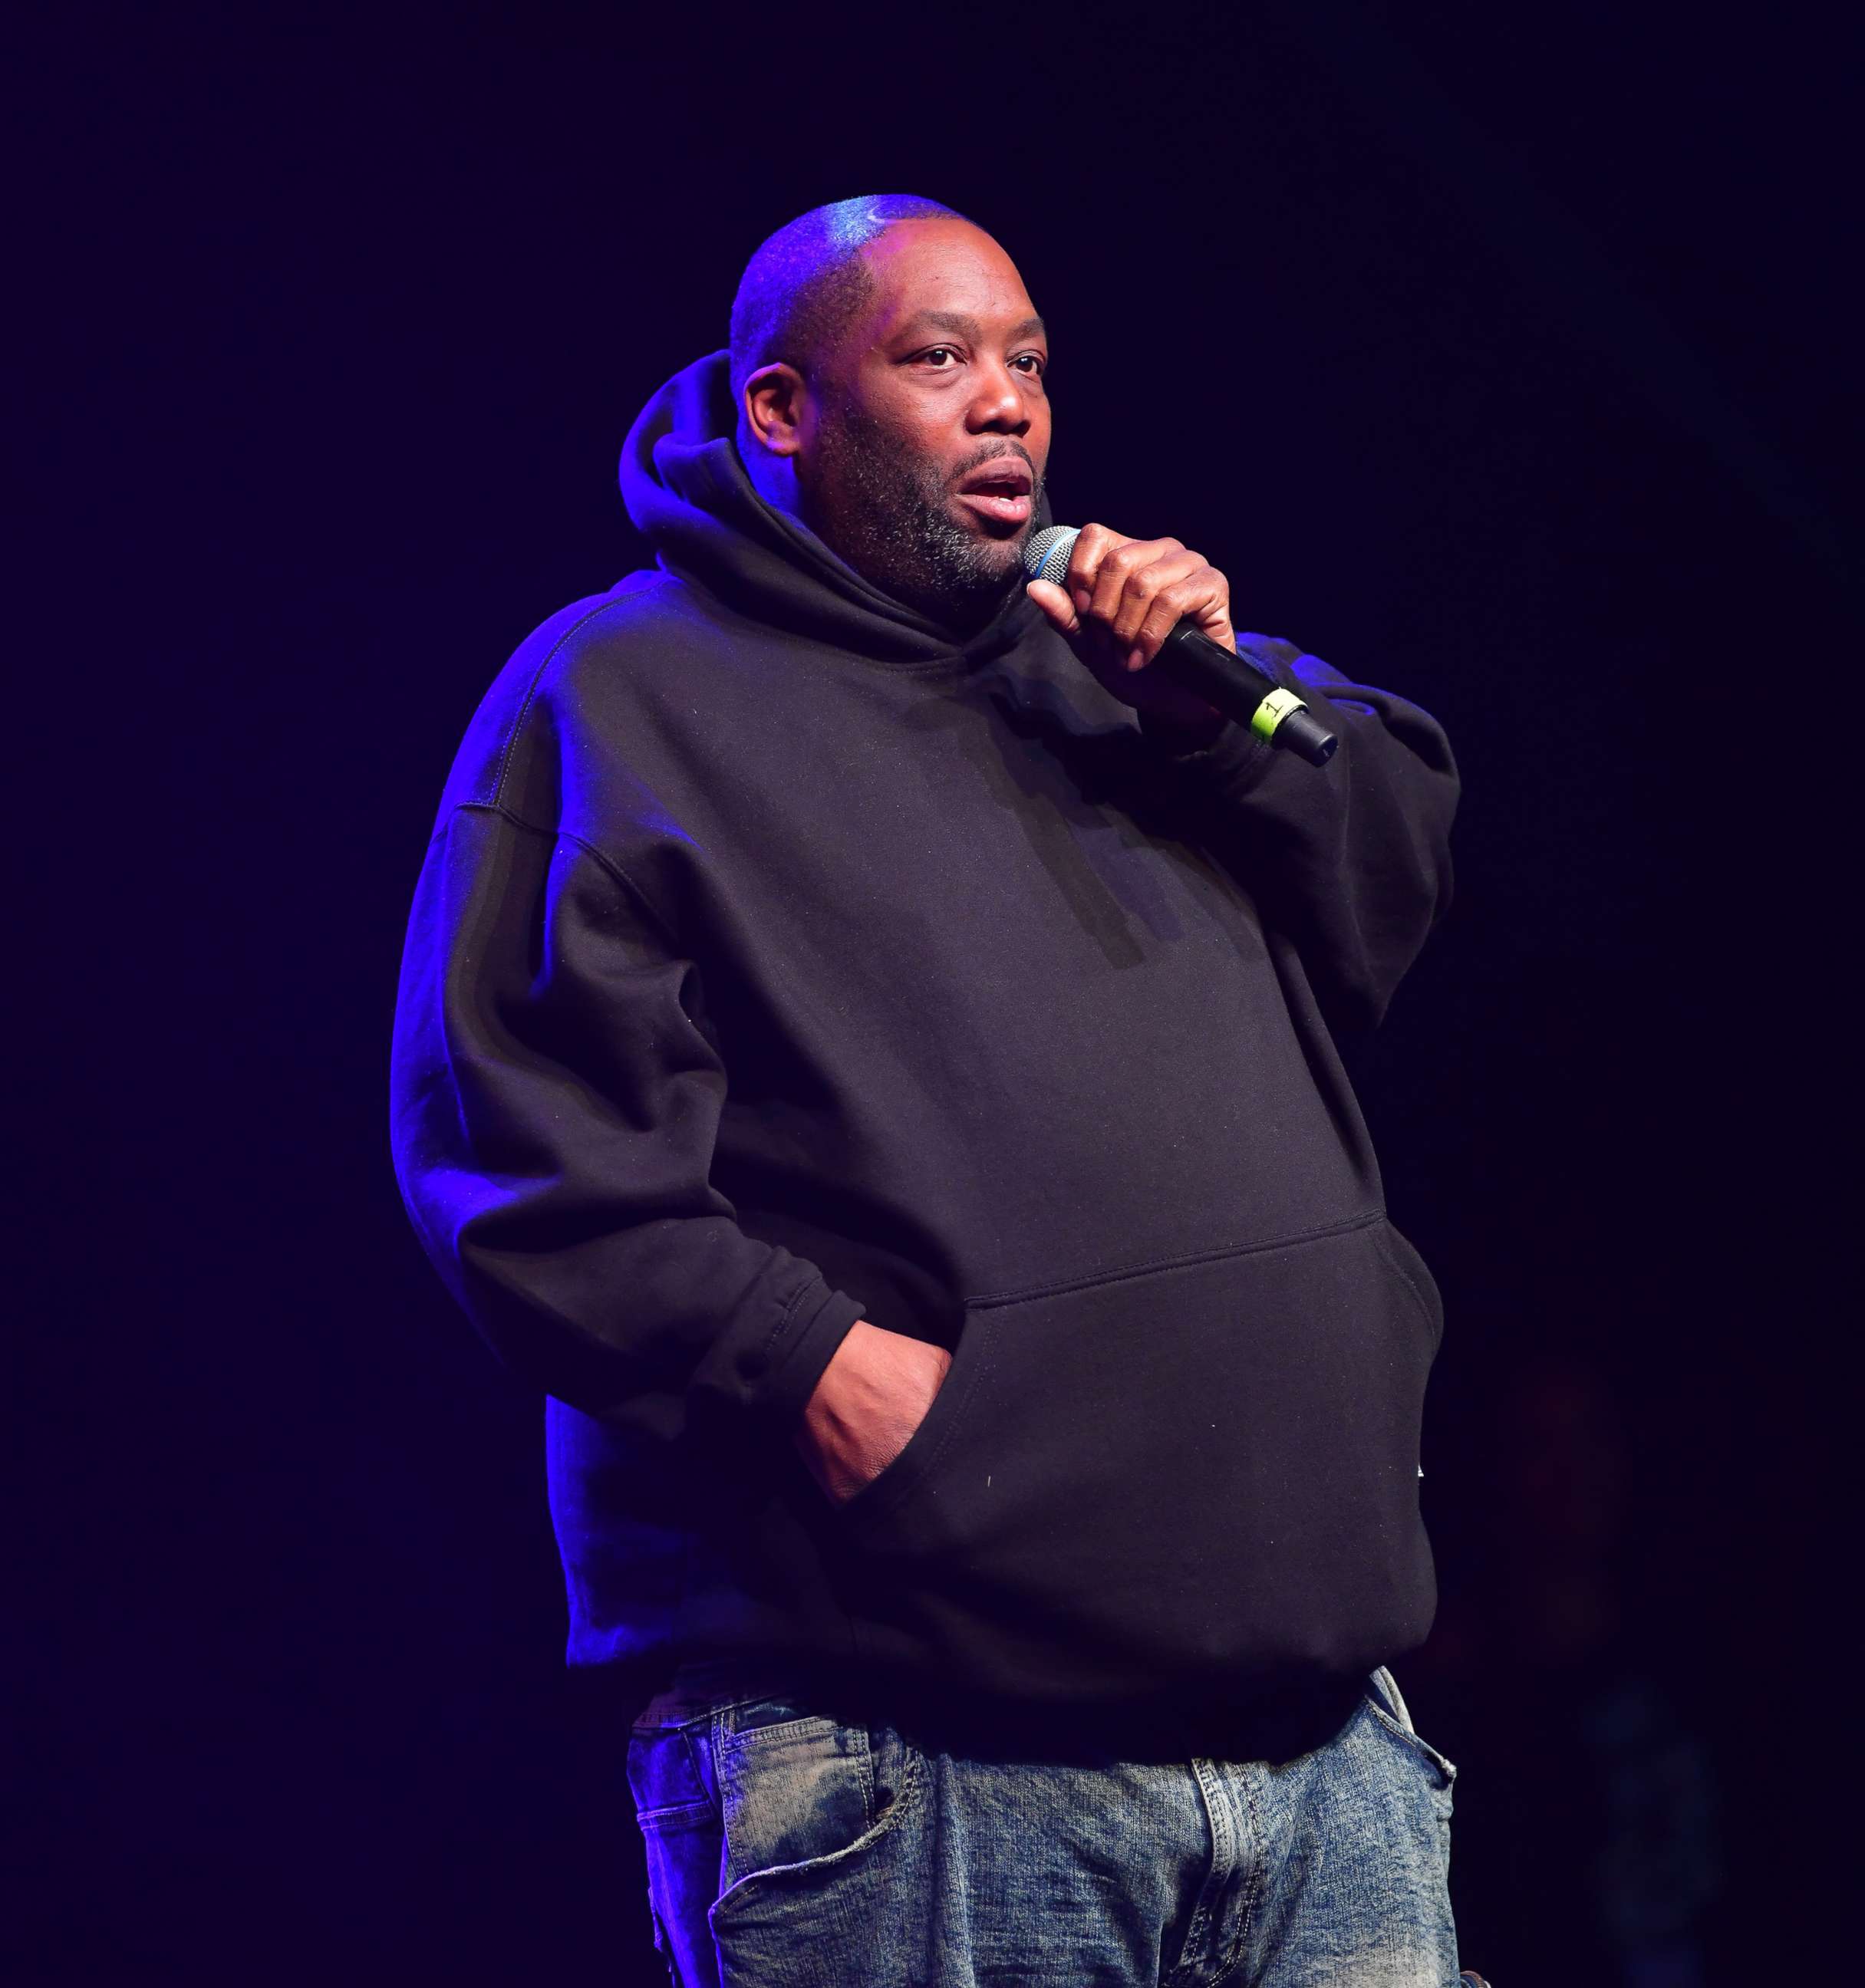 PHOTO: In this Nov. 28, 2021, file photo, Killer Mike speaks onstage at an event in Atlanta.